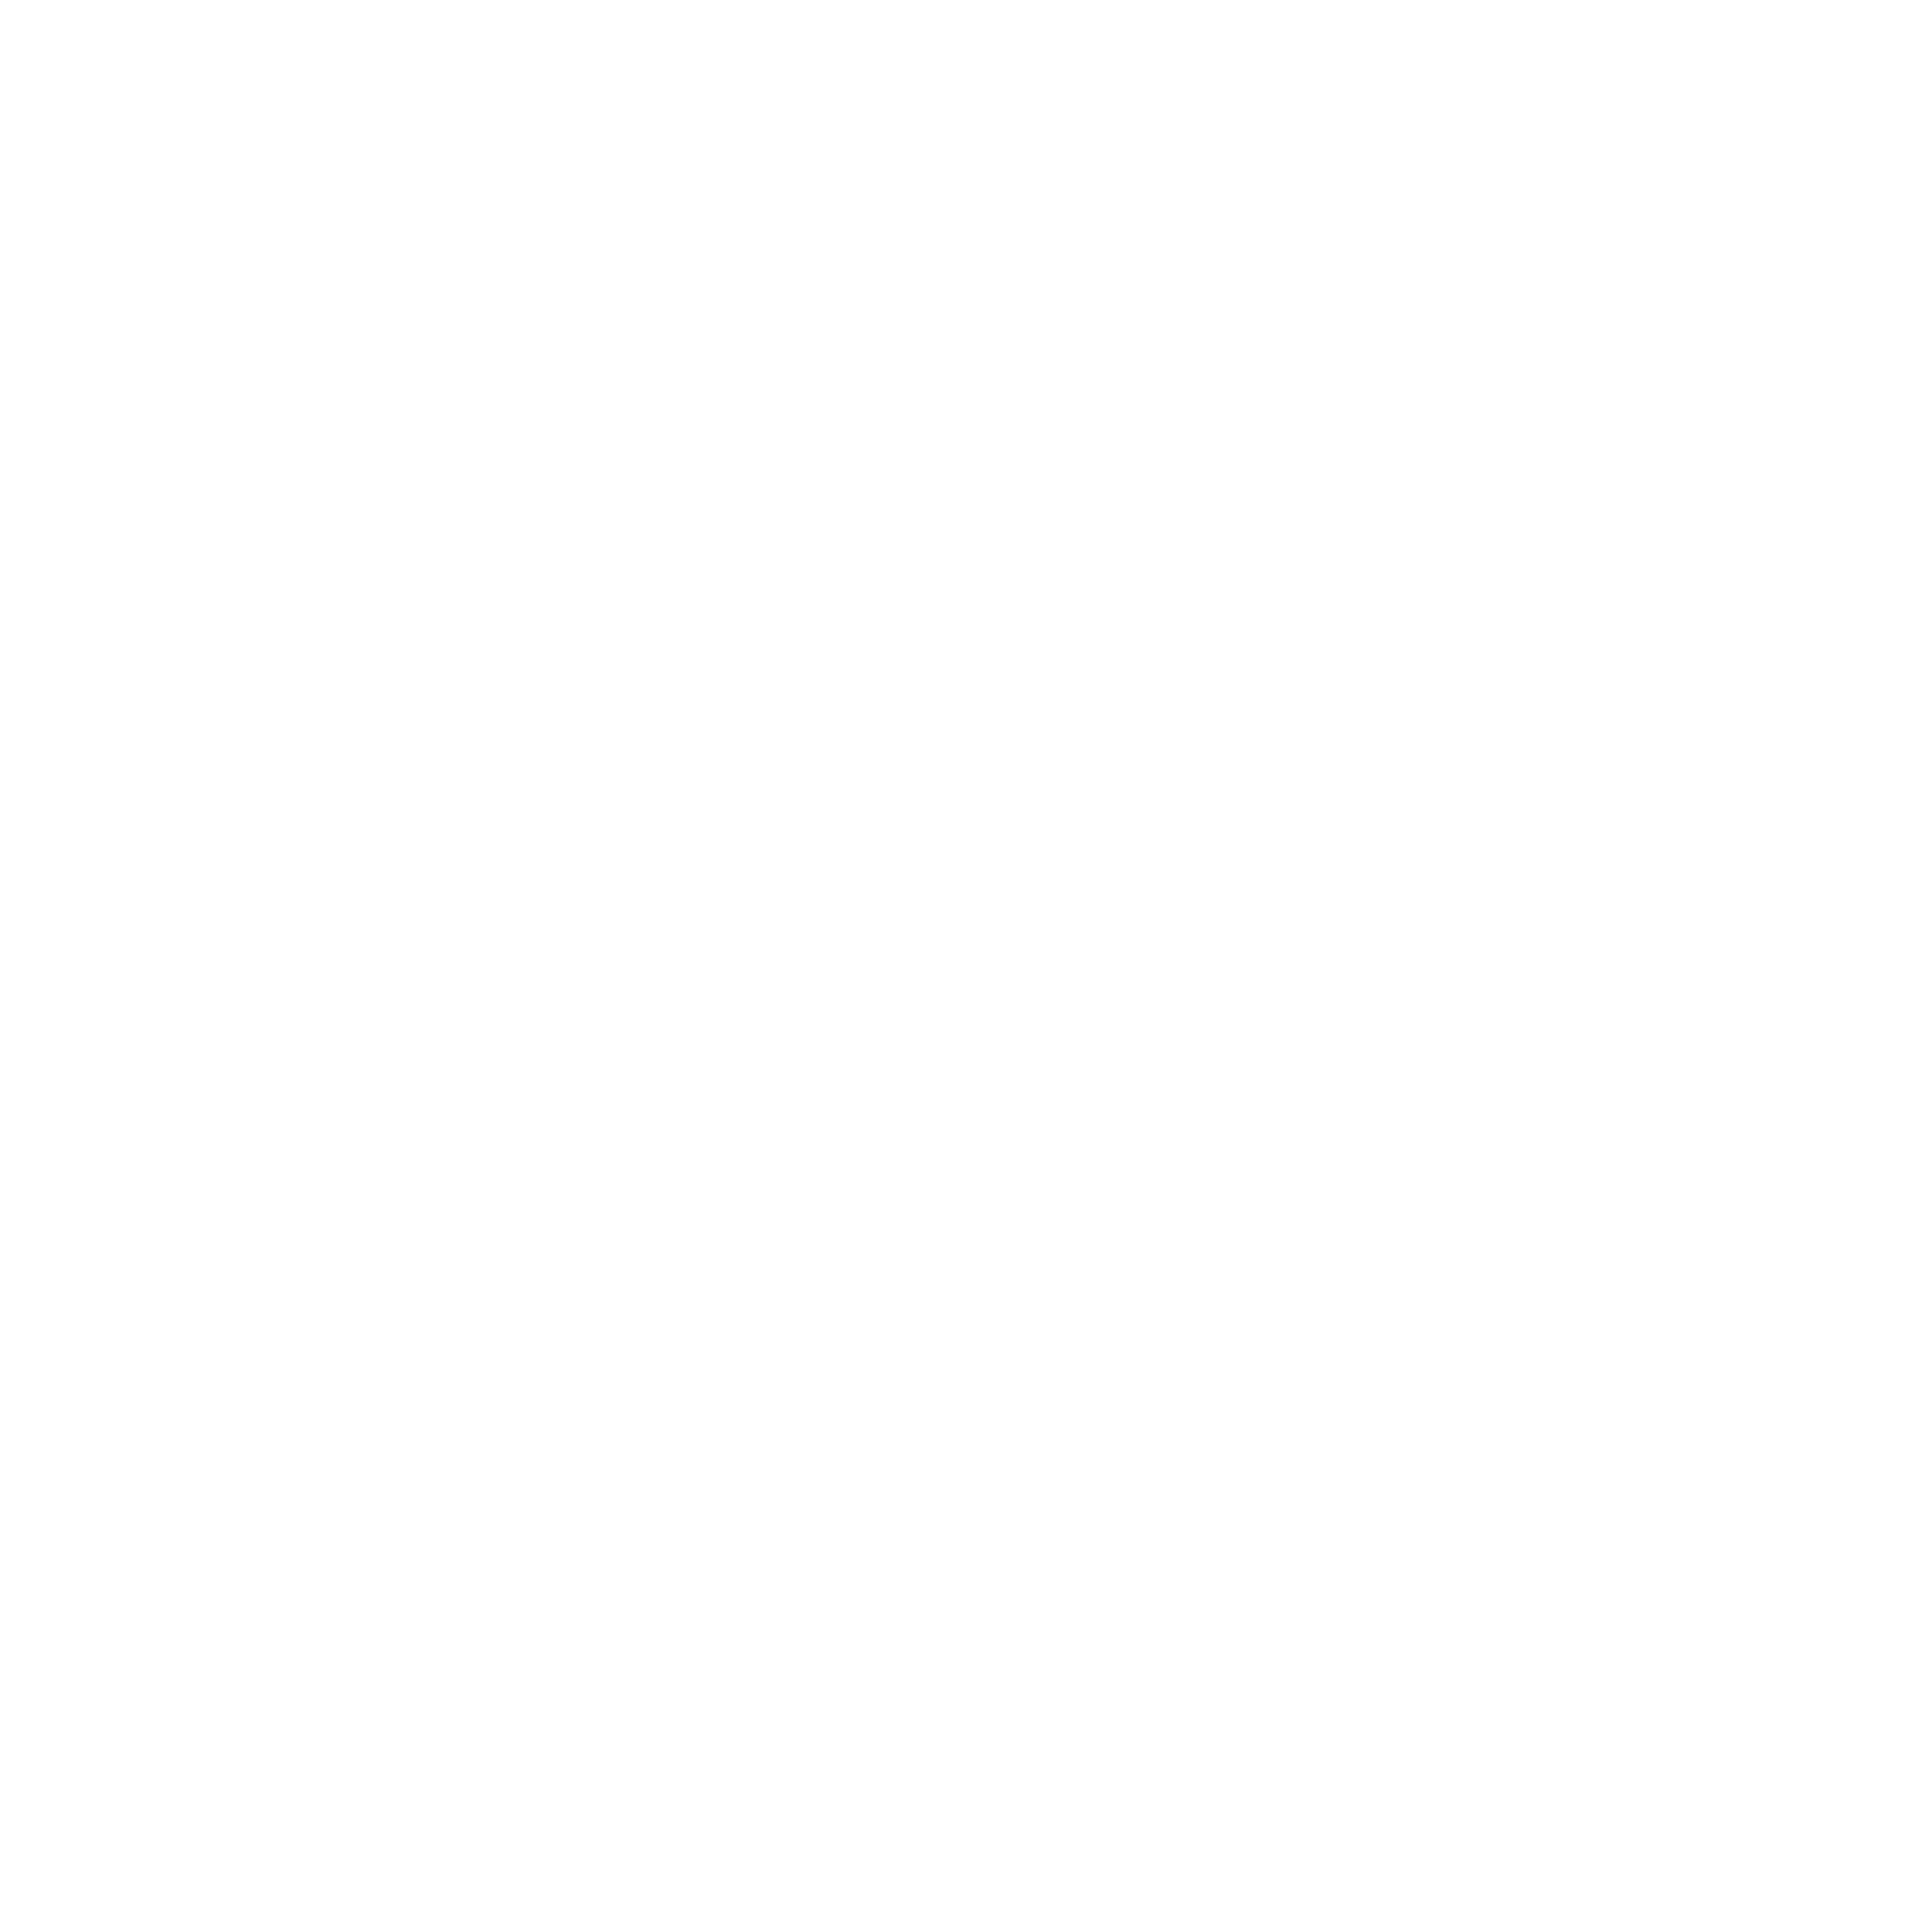 Be brutal - tell us what you think of Talentometry.co.uk